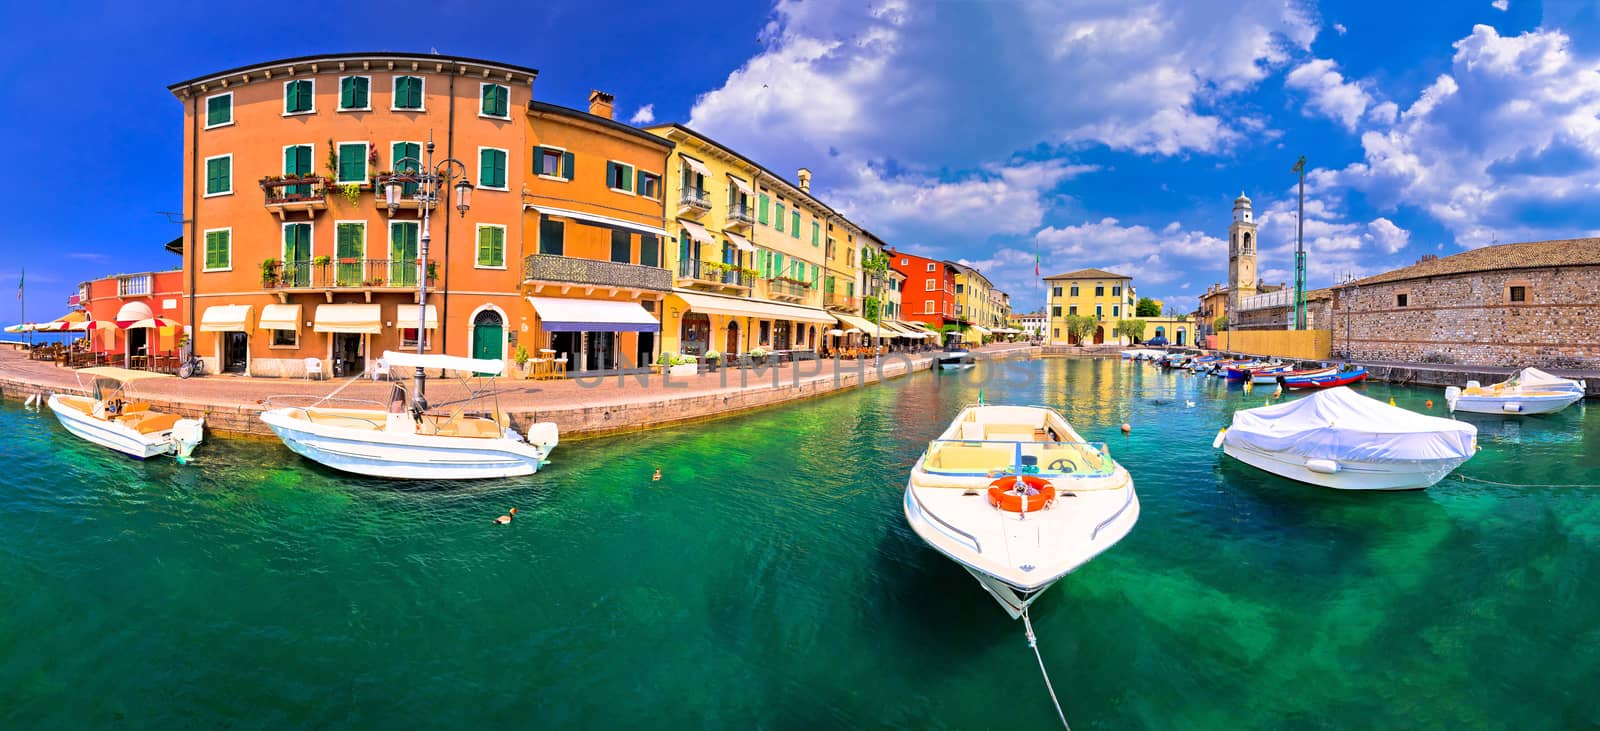 Lazise colorful harbor and boats panoramic view by xbrchx